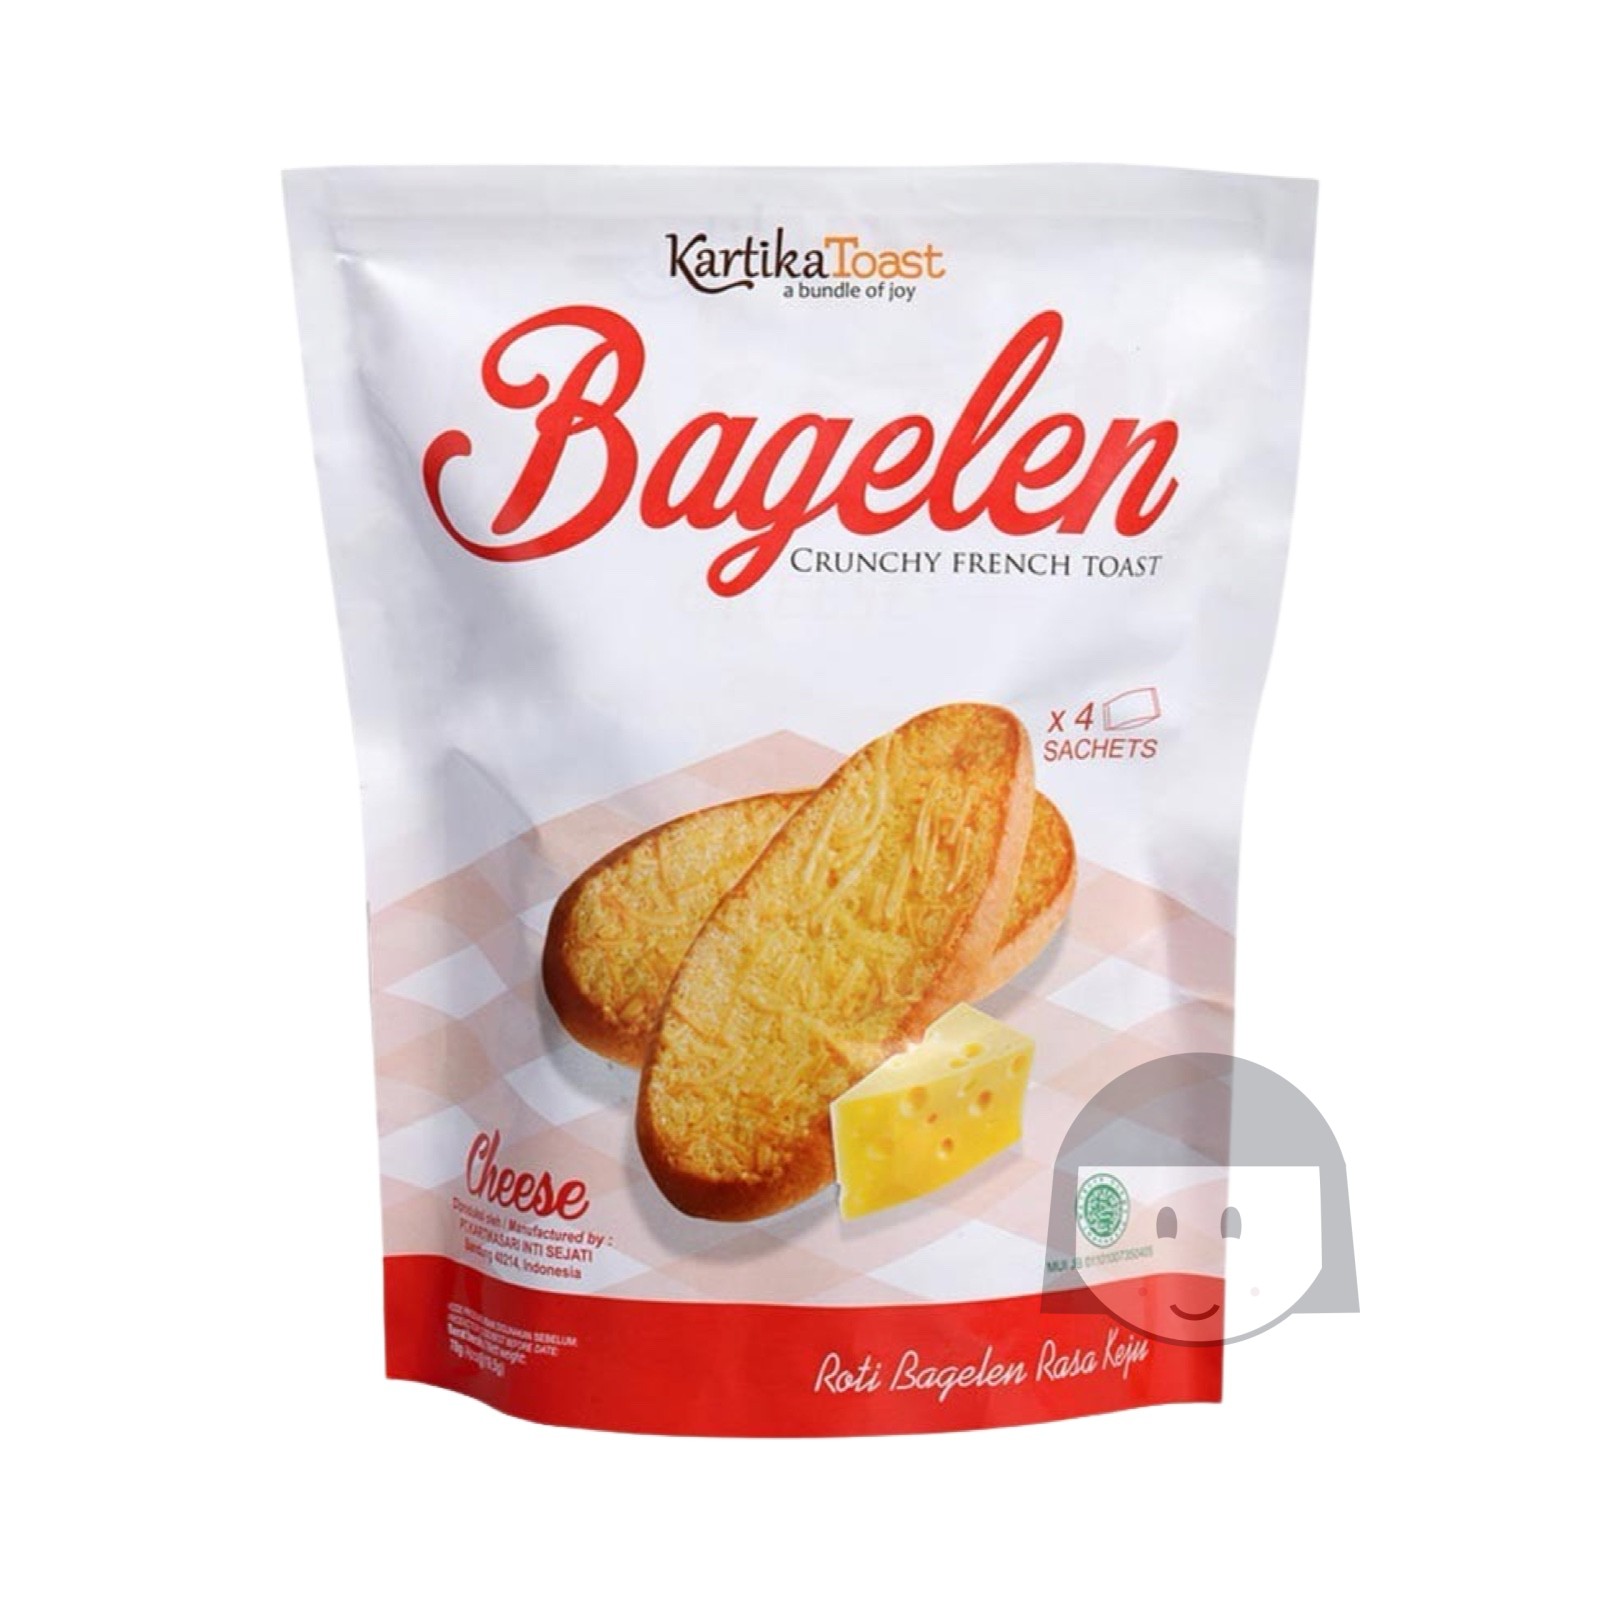 Kartika Toast Bagelen Cheese 19,5 gr, 4 pcs Limited Products